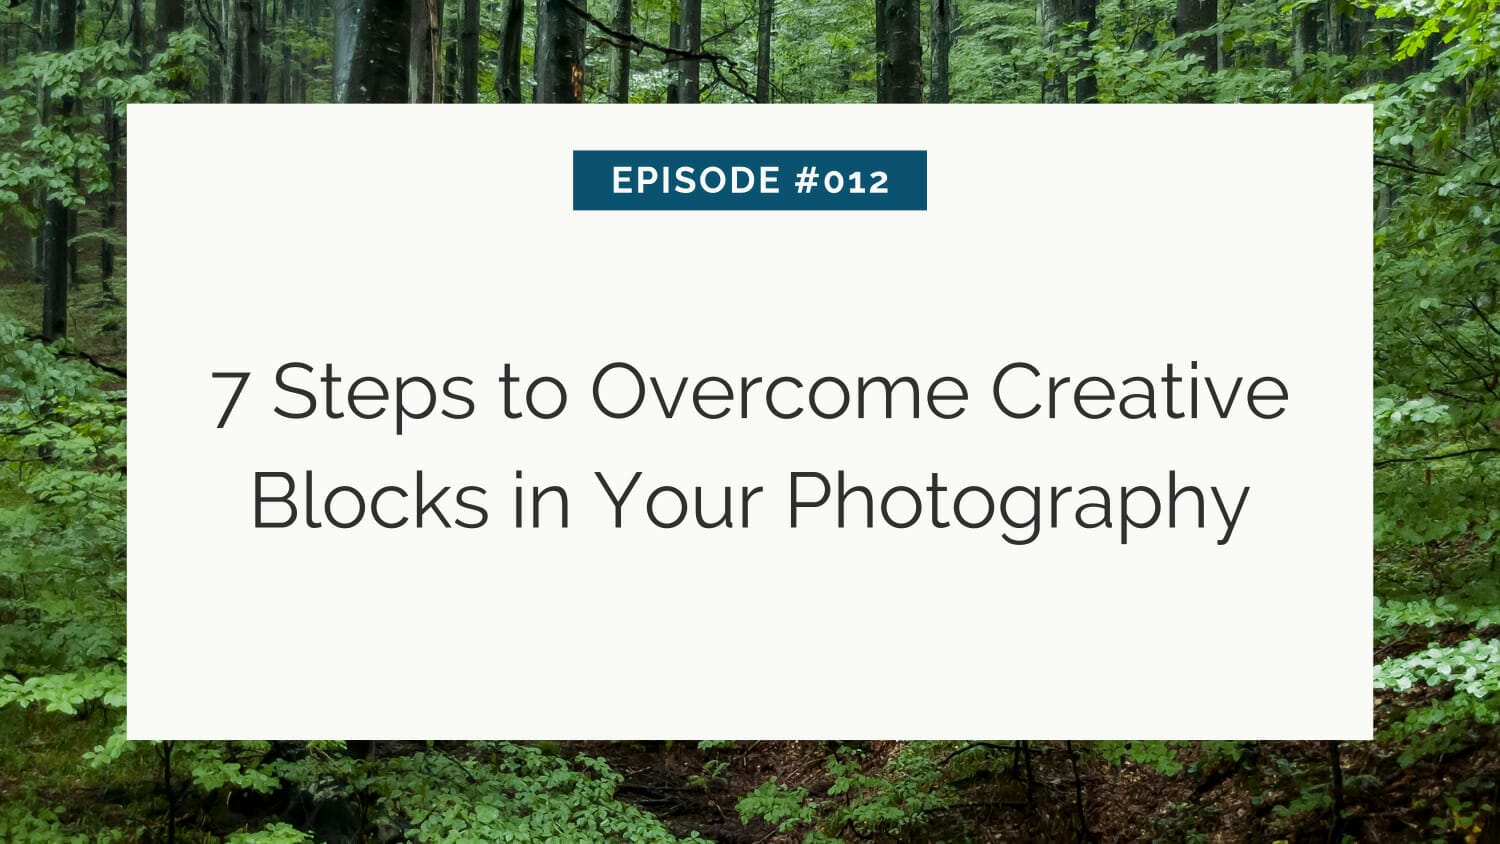 Title slide for a tutorial or podcast episode on overcoming creative blocks in photography, episode number 12, set against a backdrop of a forest.